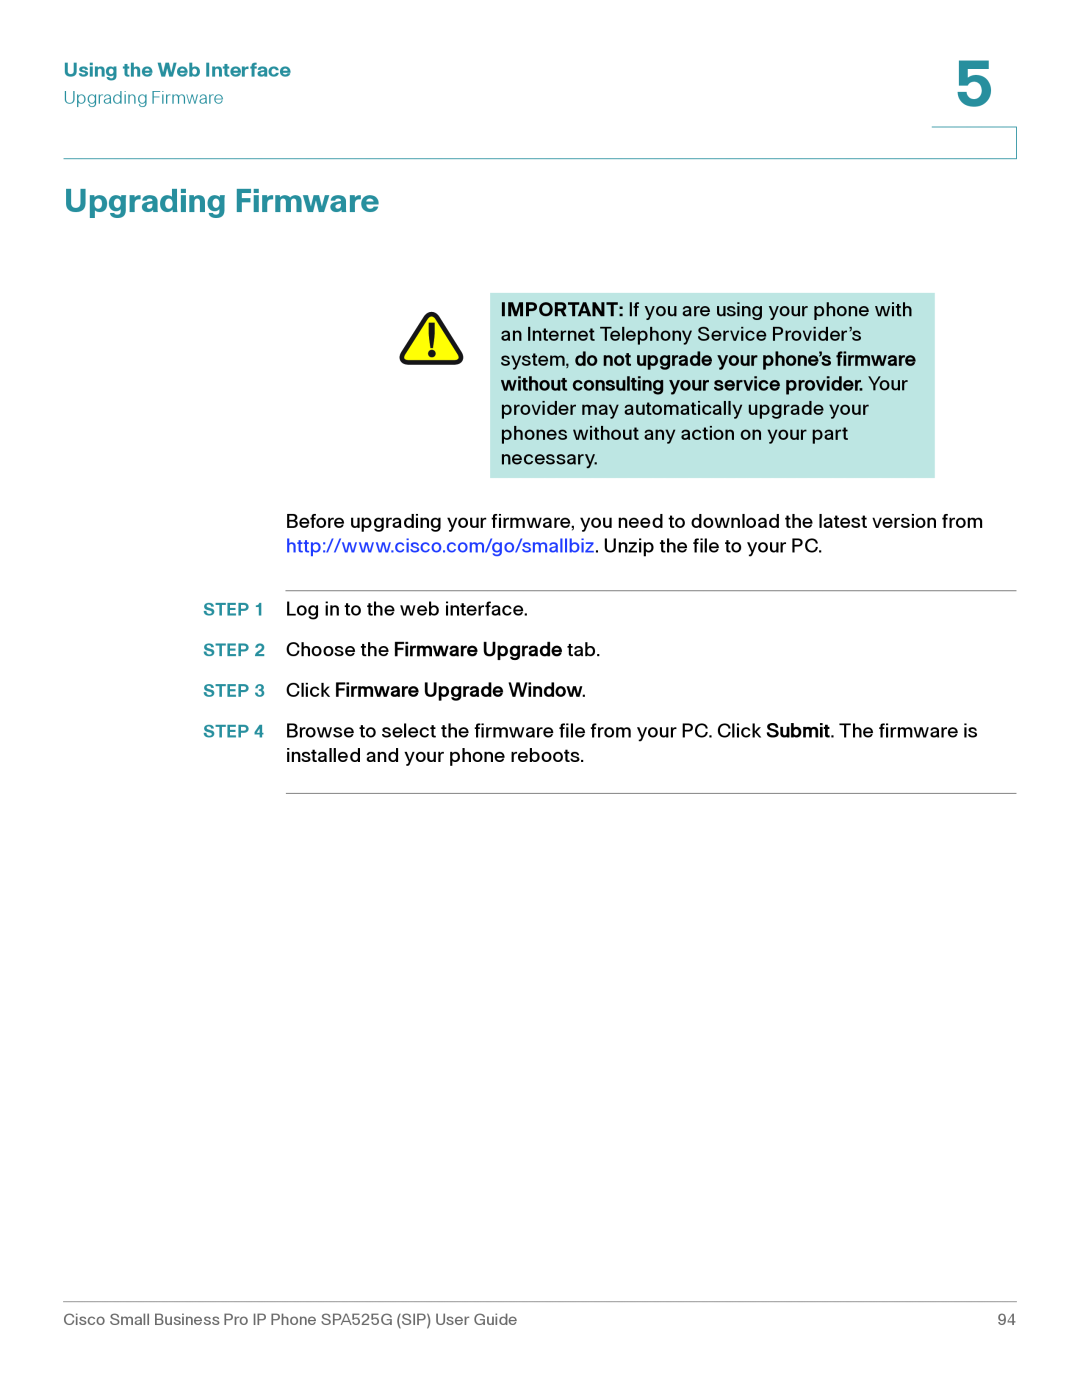 Cisco Systems SPA525G manual Upgrading Firmware, Using the Web Interface, Choose the Firmware Upgrade tab 